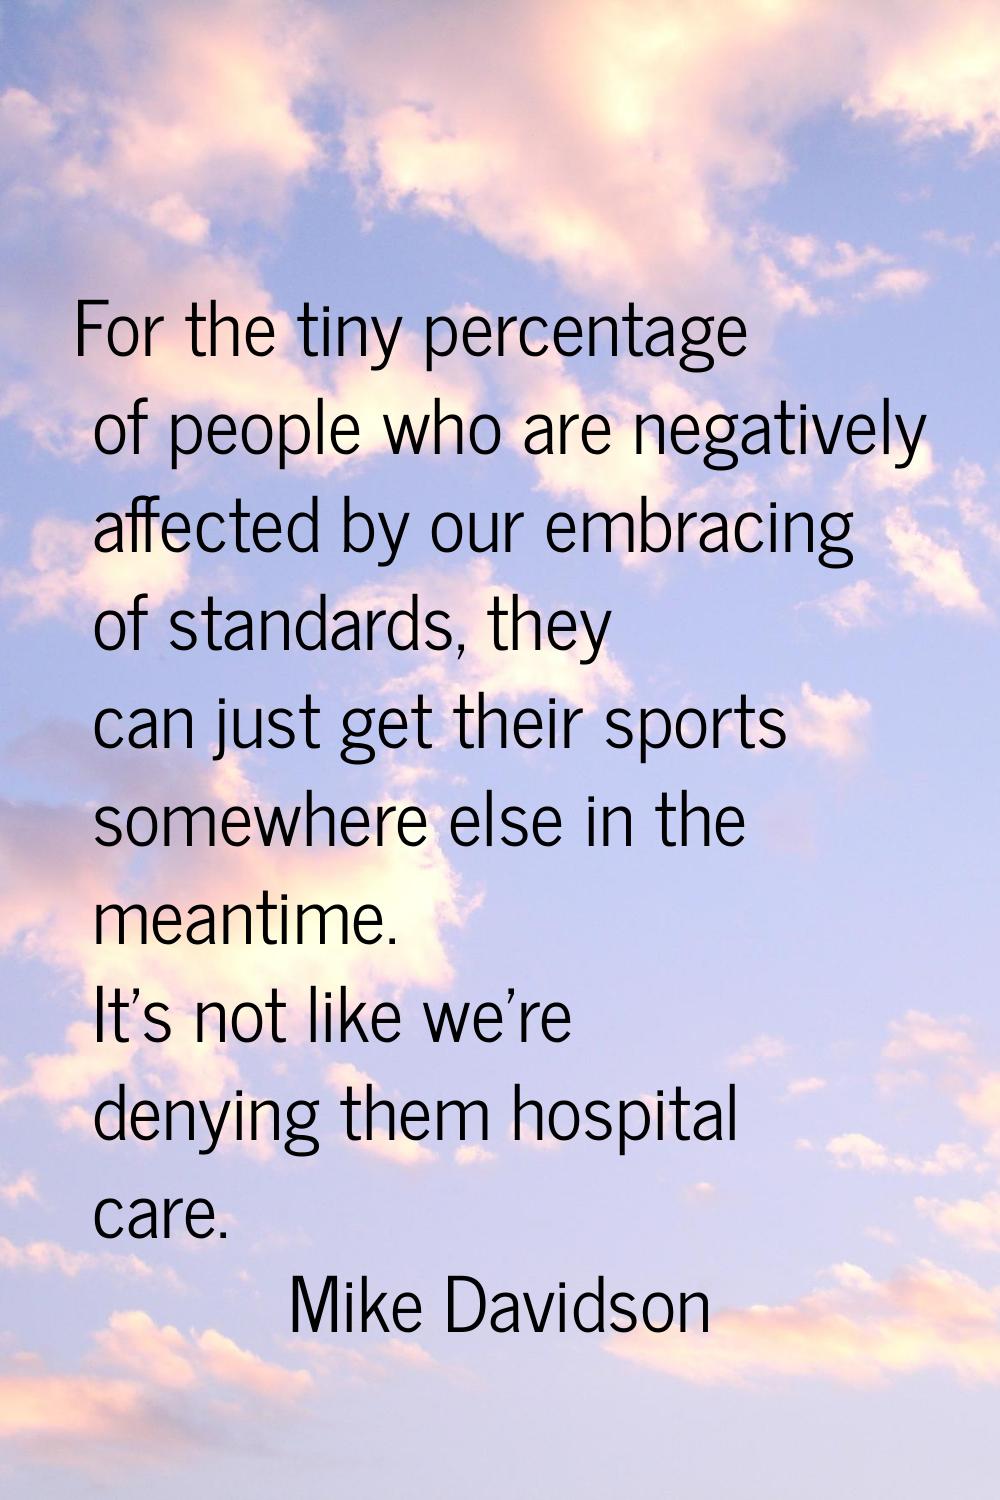 For the tiny percentage of people who are negatively affected by our embracing of standards, they c